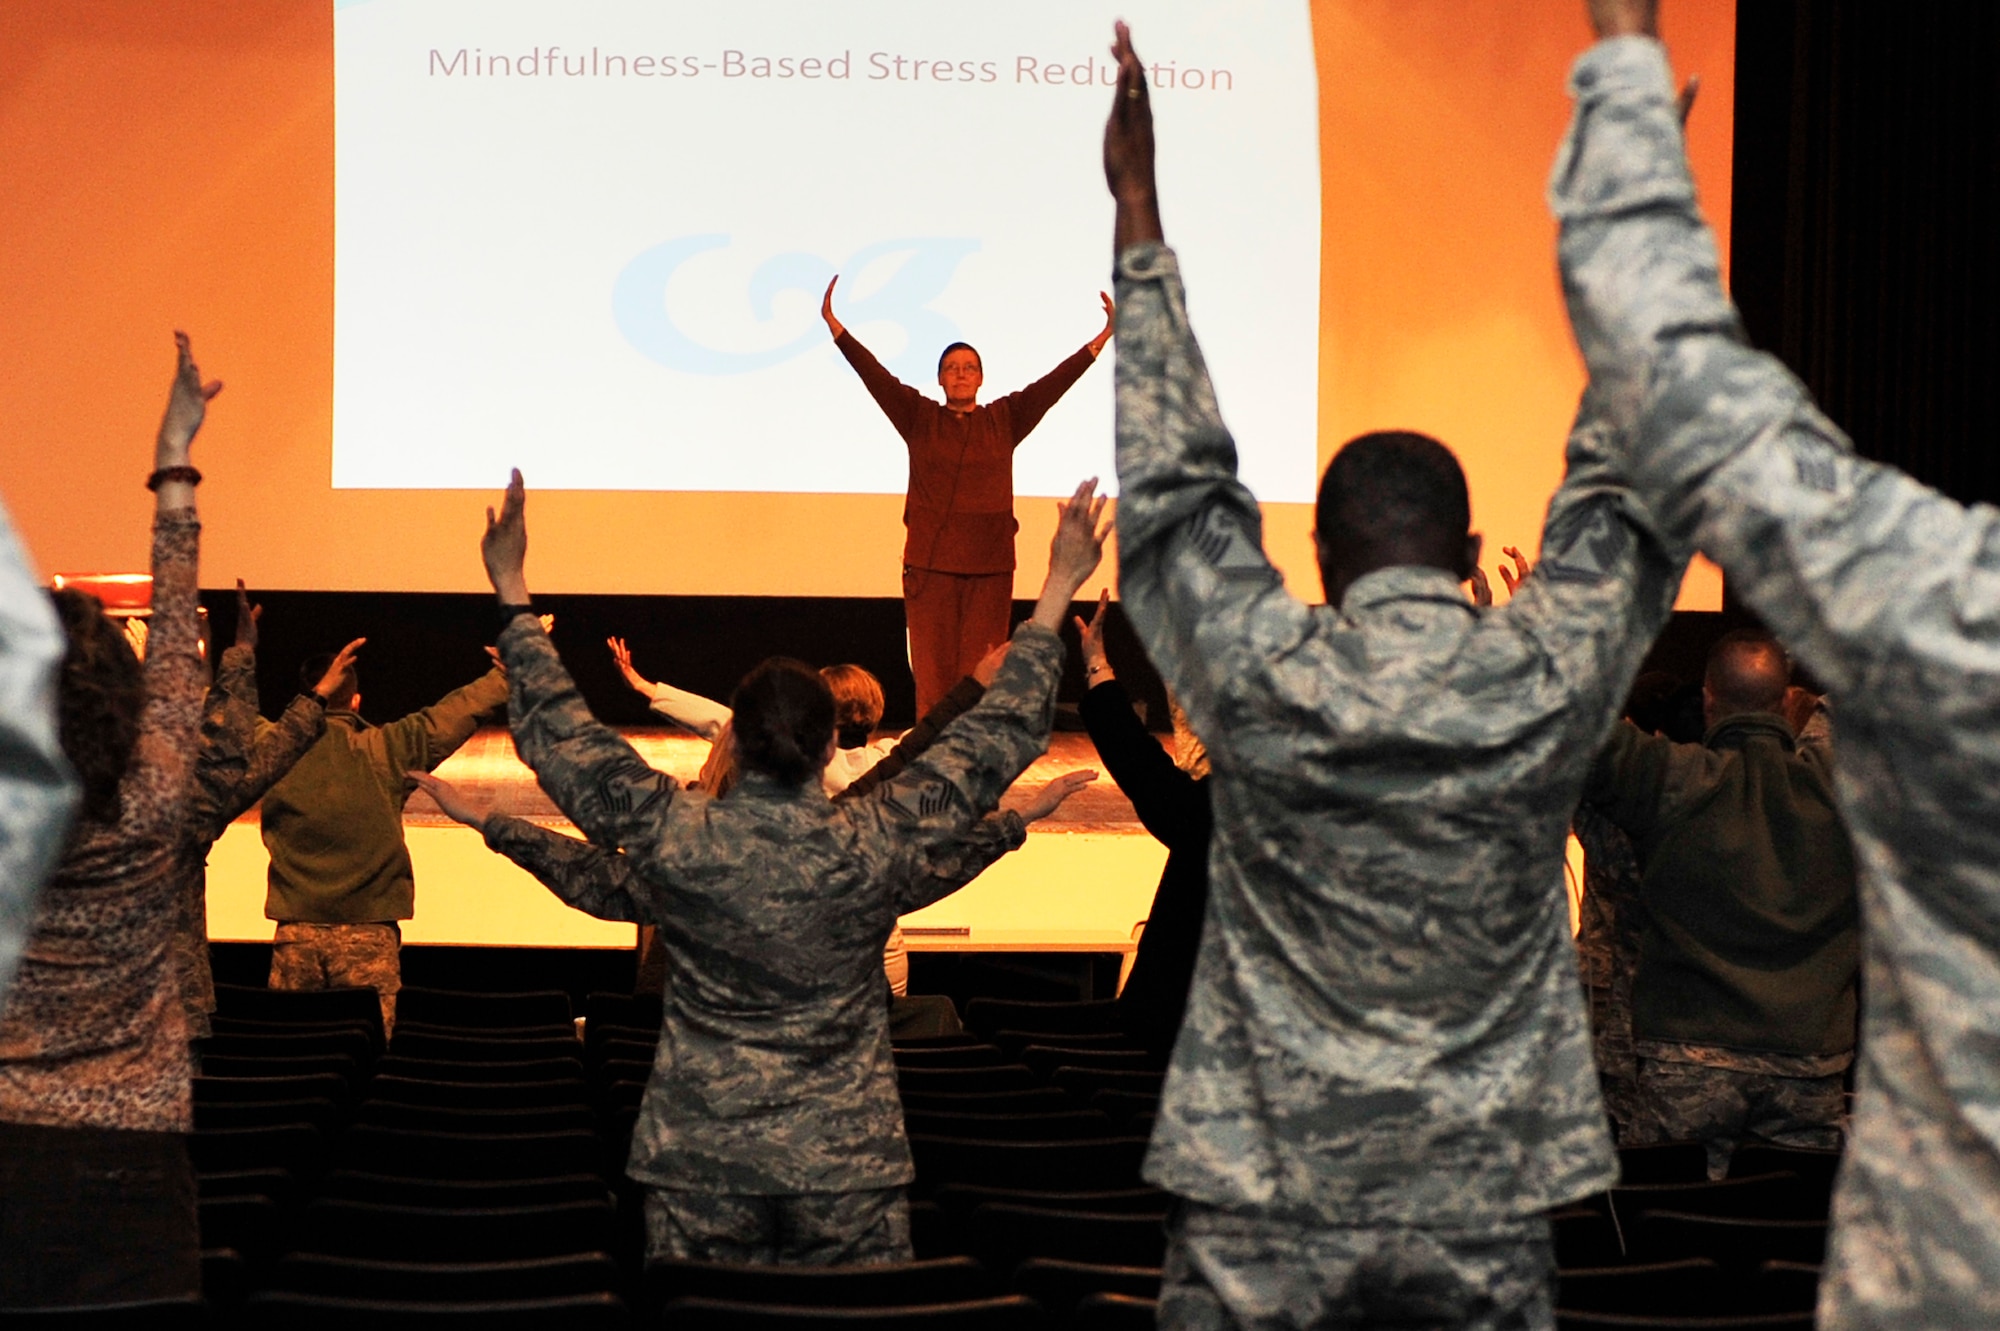 Bridget Rolens demonstrates various mindfulness activities during the Mindfulness-Based Stress Reduction luncheon Feb. 27 at Scott. Mindfulness meditation is being used in a variety of ways in the military. Rolens is the owner and program facilitator for the Pathways to Mindfulness. (U.S. Air Force photo/Airman 1st Class Kiana Brothers)